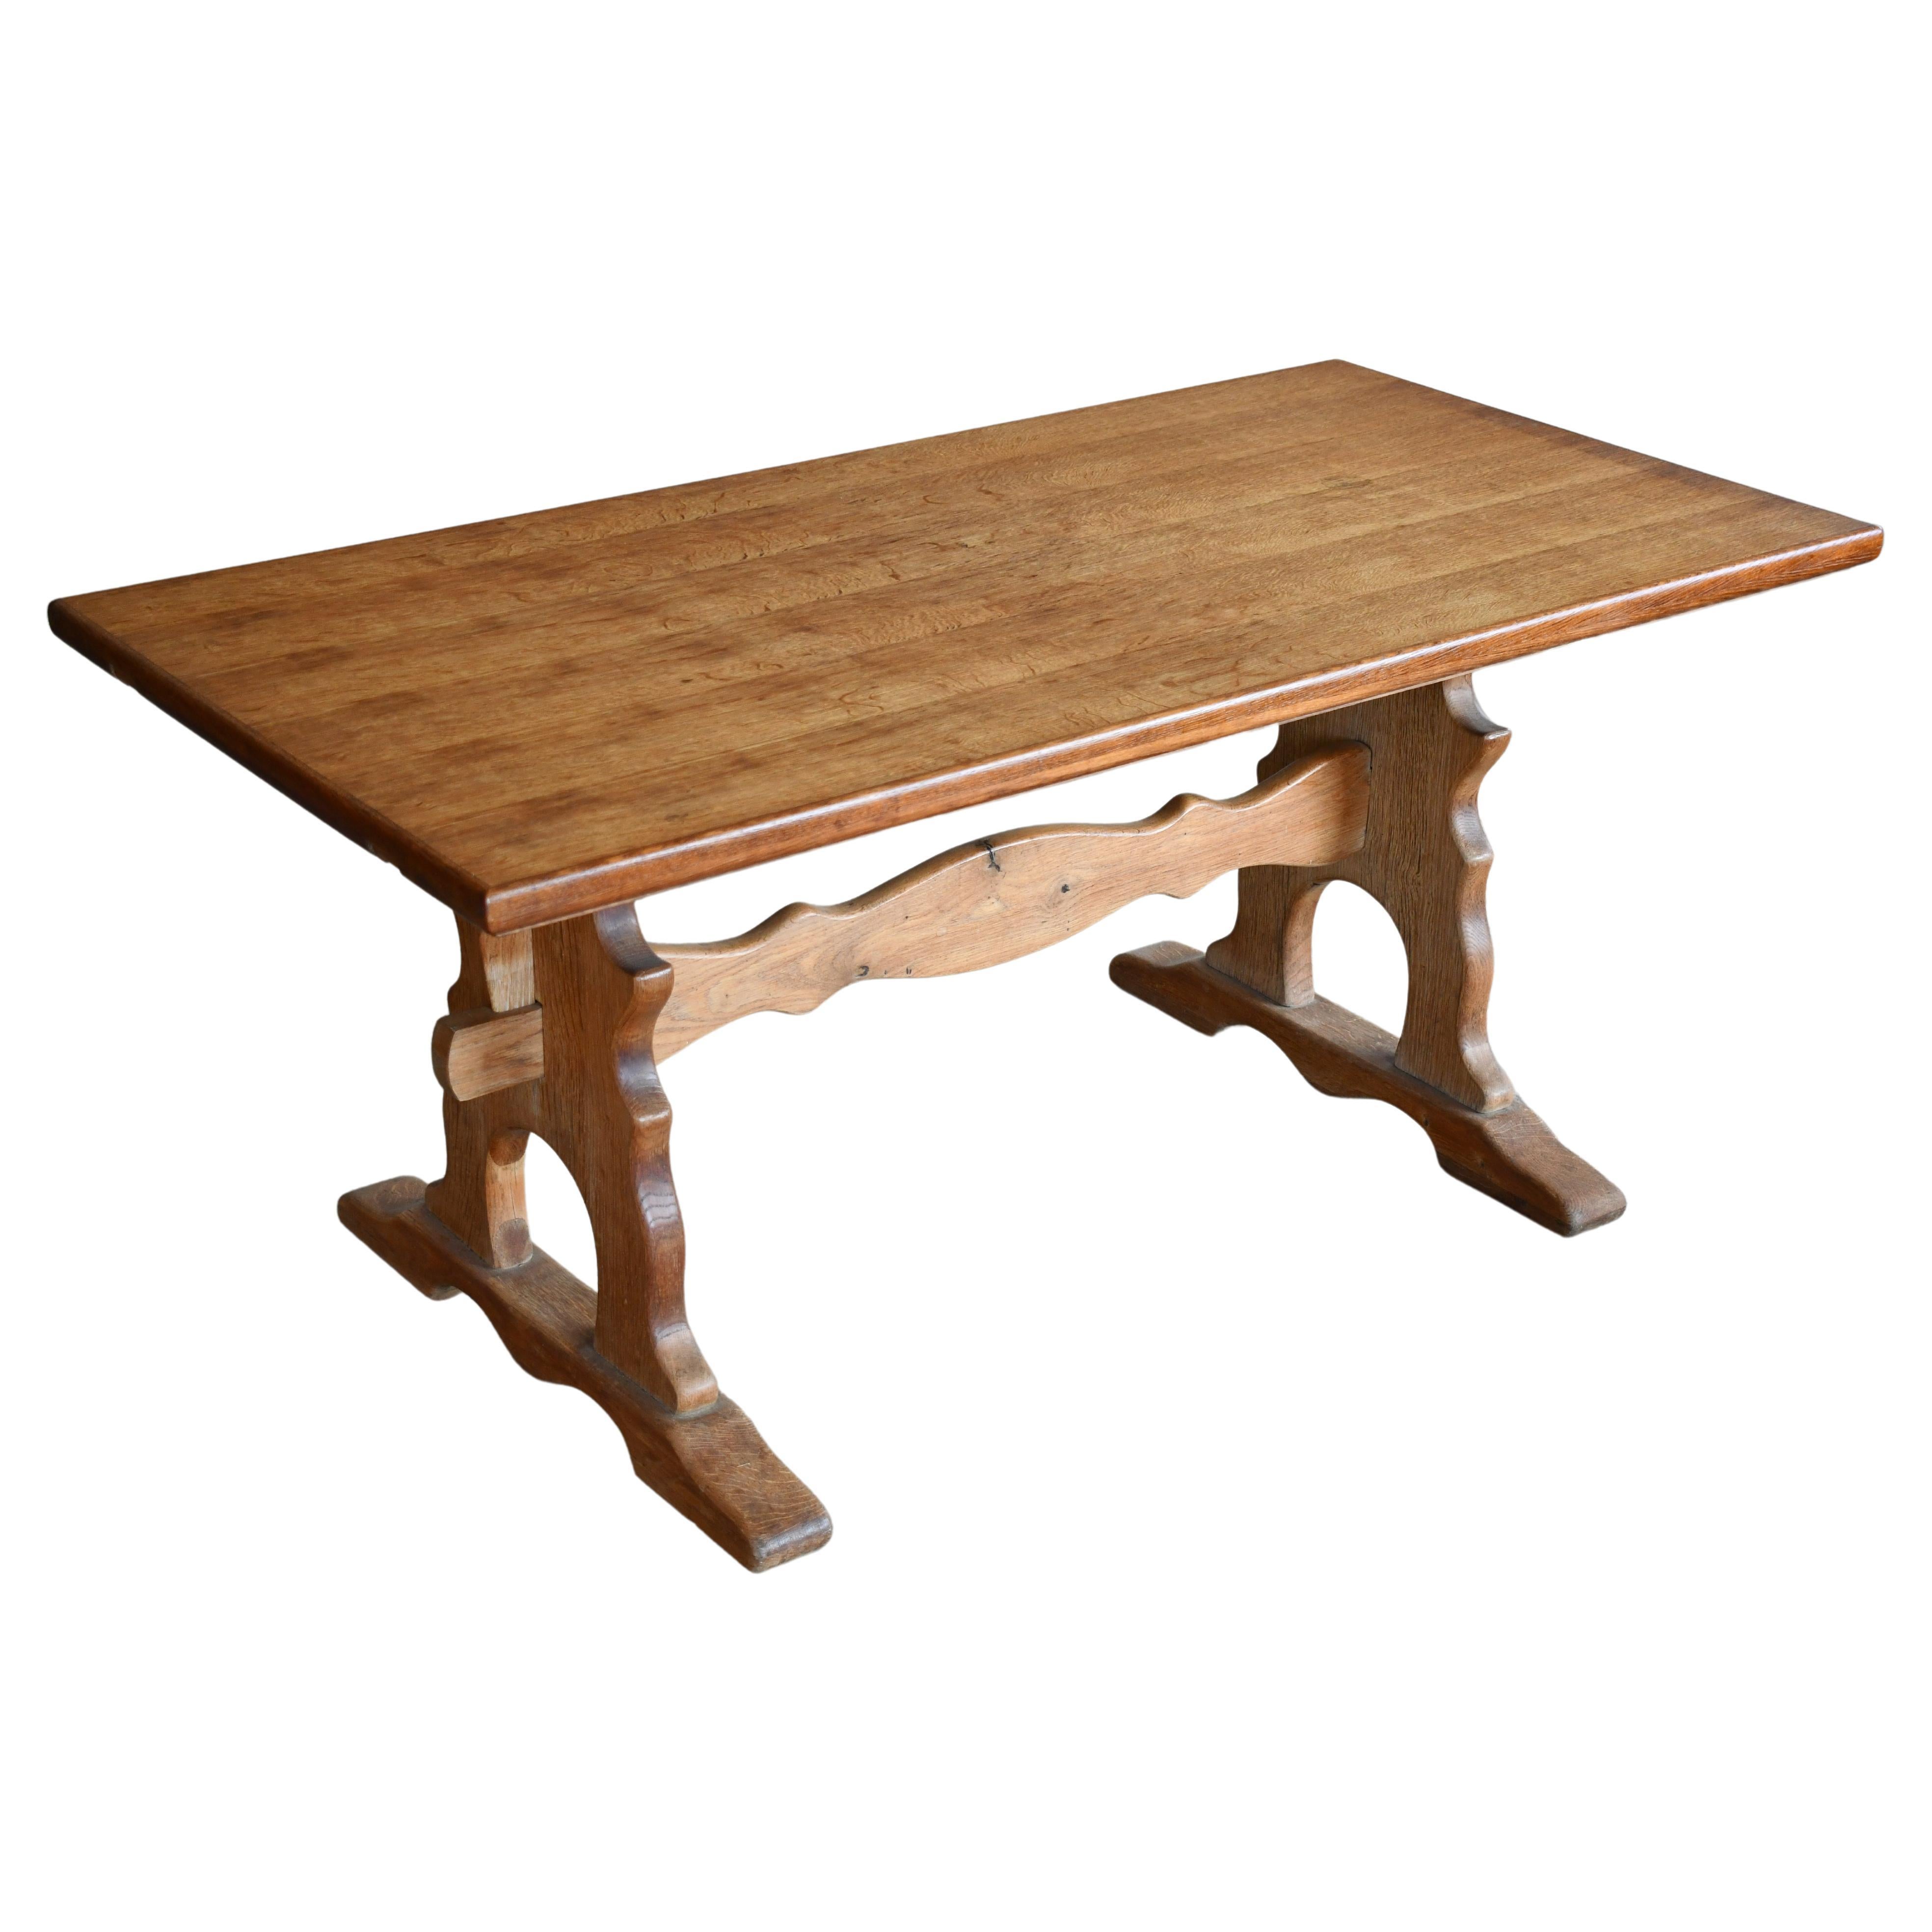 Danish Country or Provence Style Dining Table in Solid Oak, ca 1960's